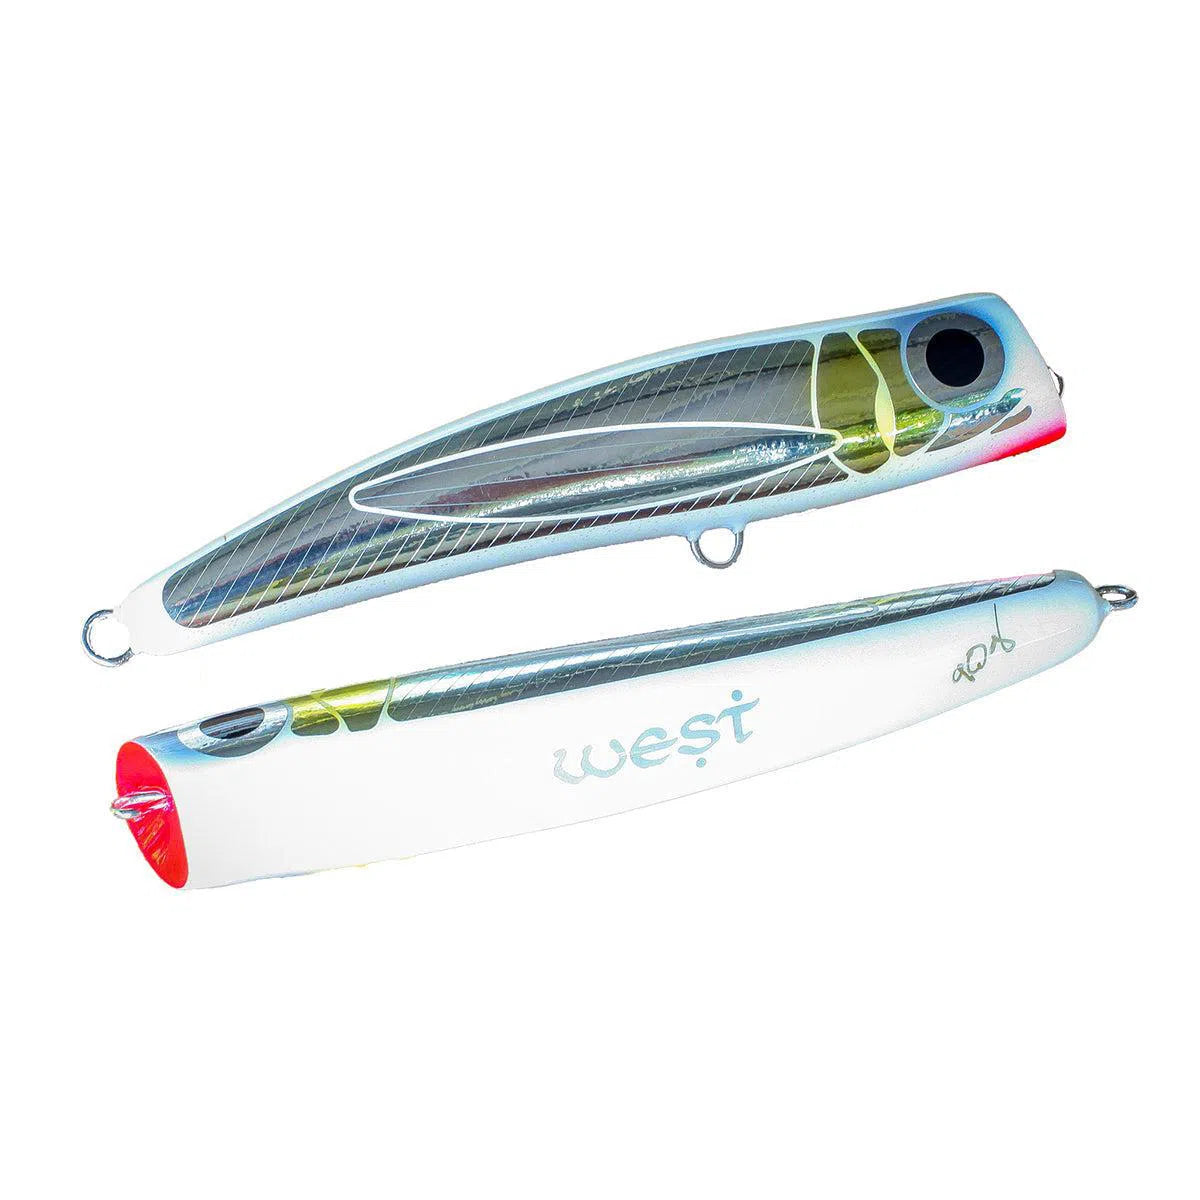 West Coast Poppers Dana Diving Poppers-Lure - Poppers, Stickbaits & Pencils-West Coast Poppers-White Foil-X-120g-Fishing Station